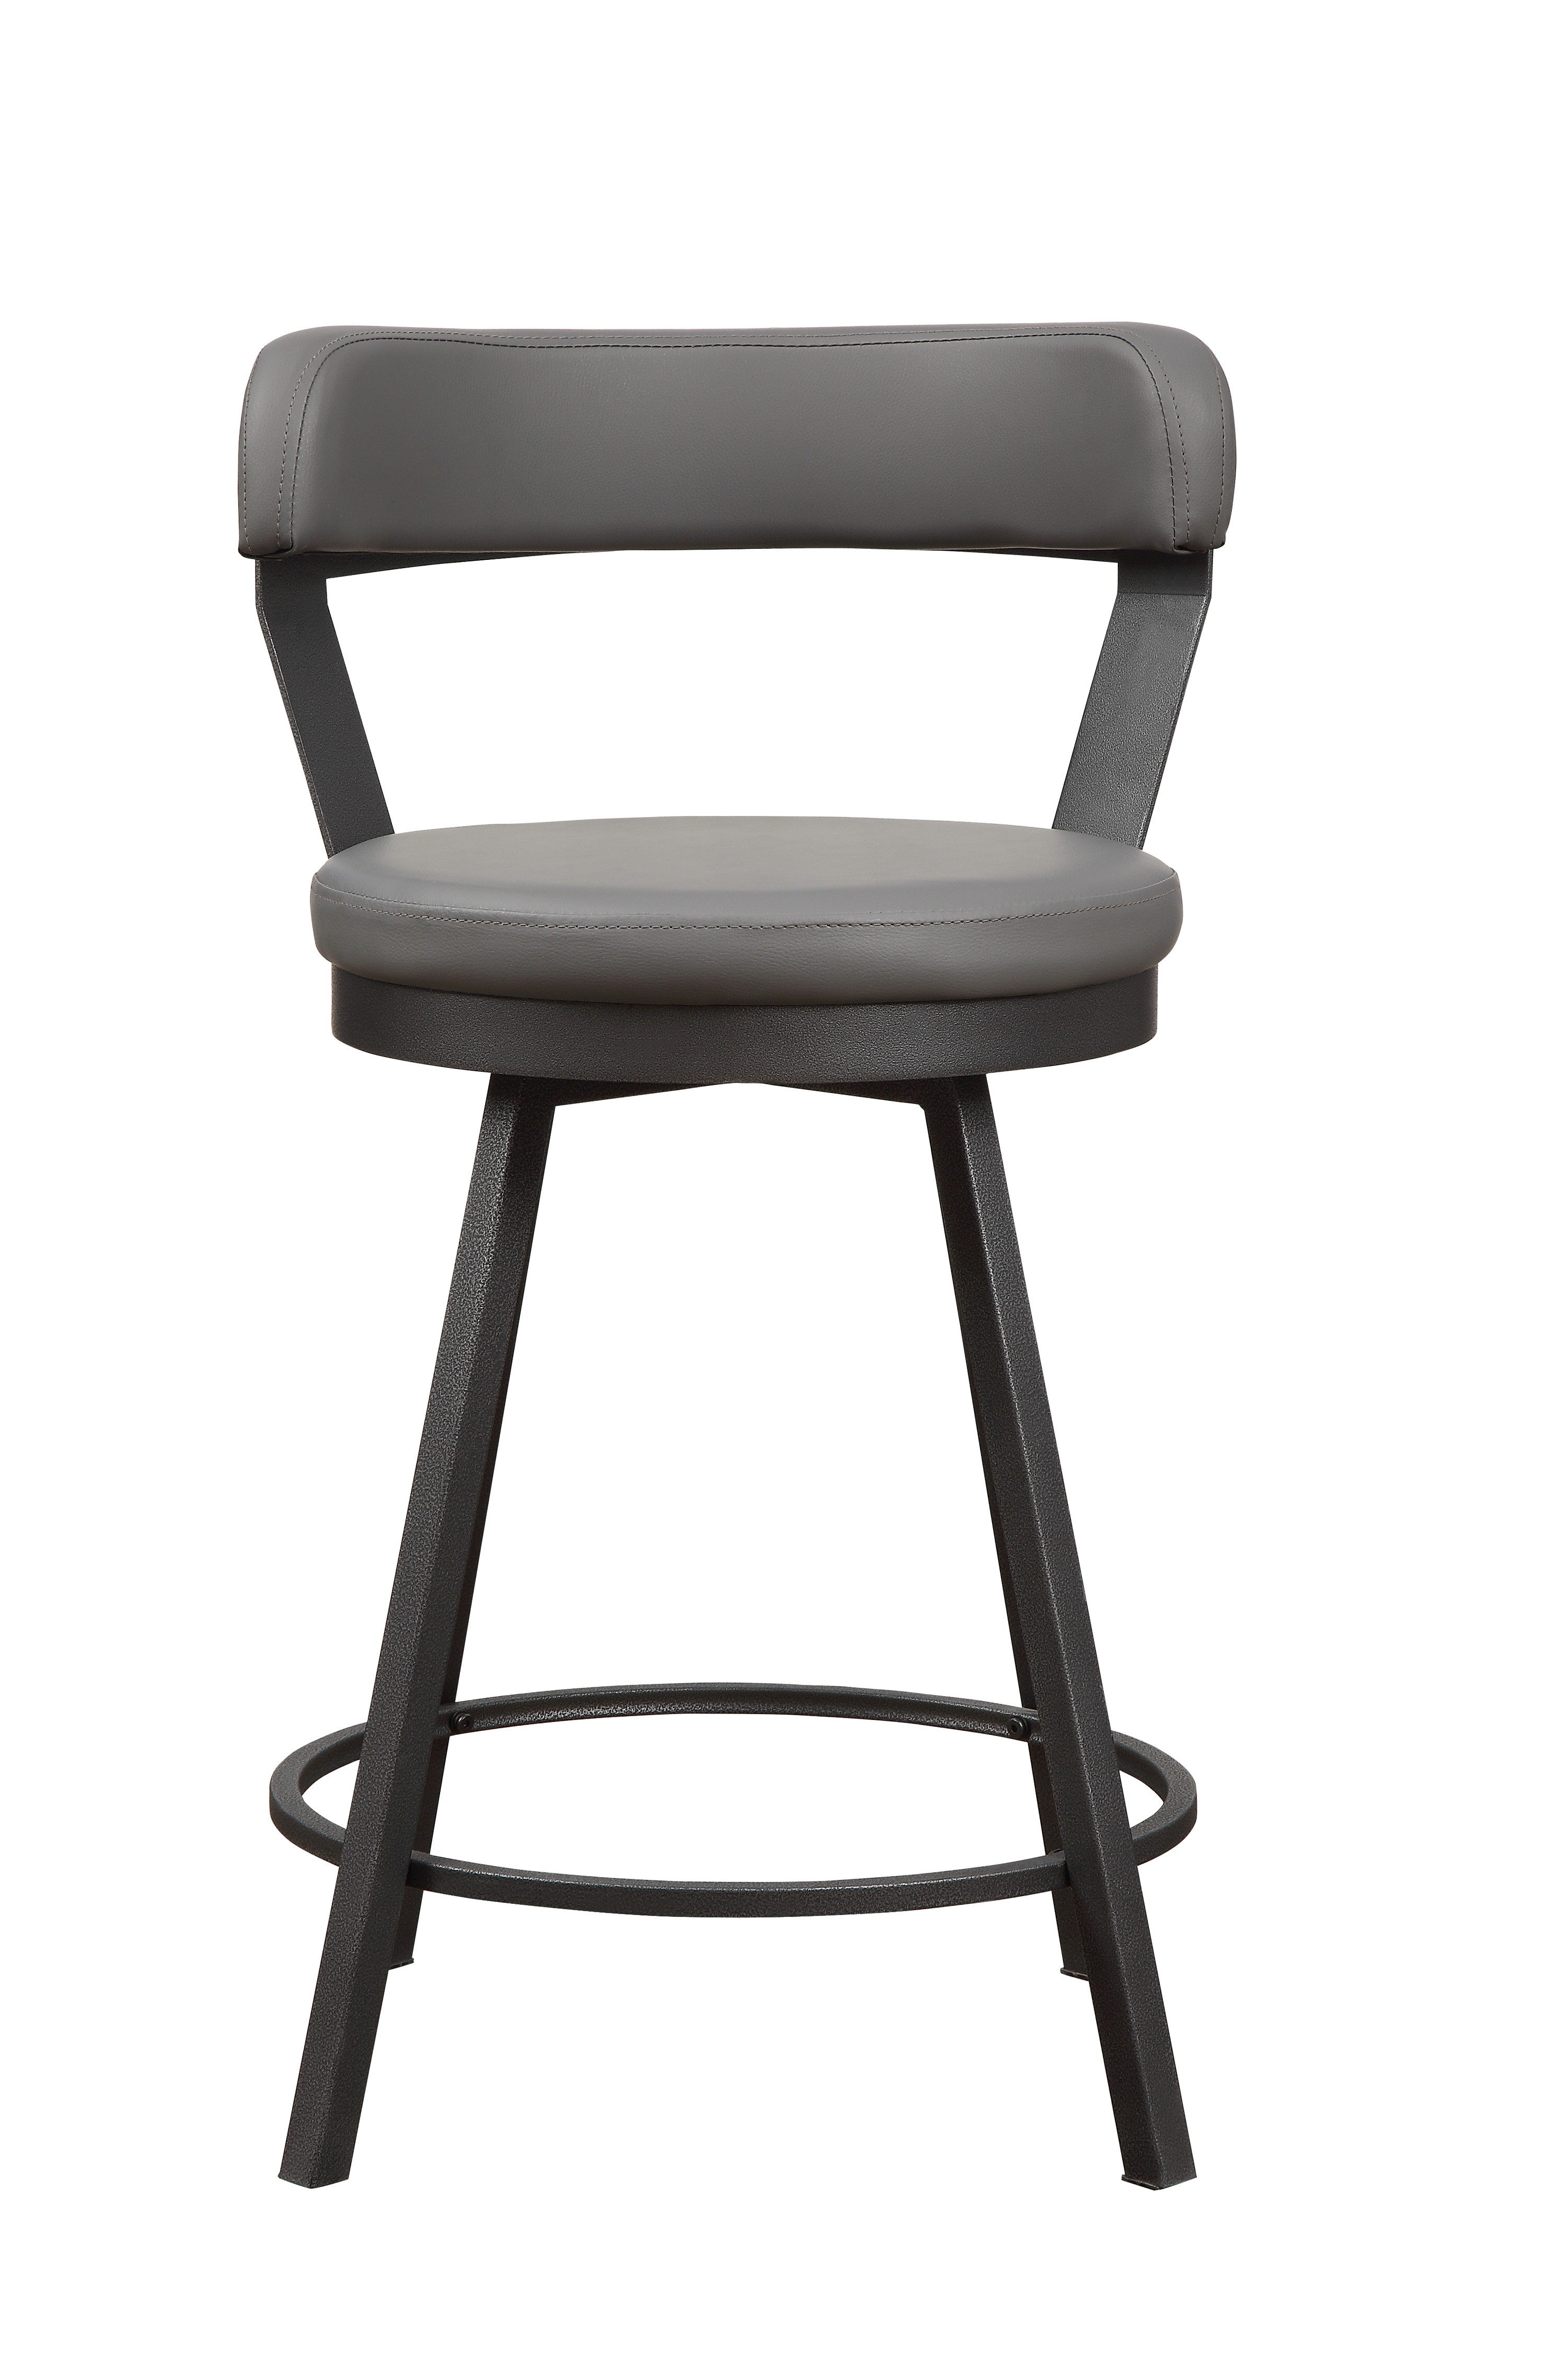 Swivel Counter Height Chair Grey 5566-24GY (Set of 2)